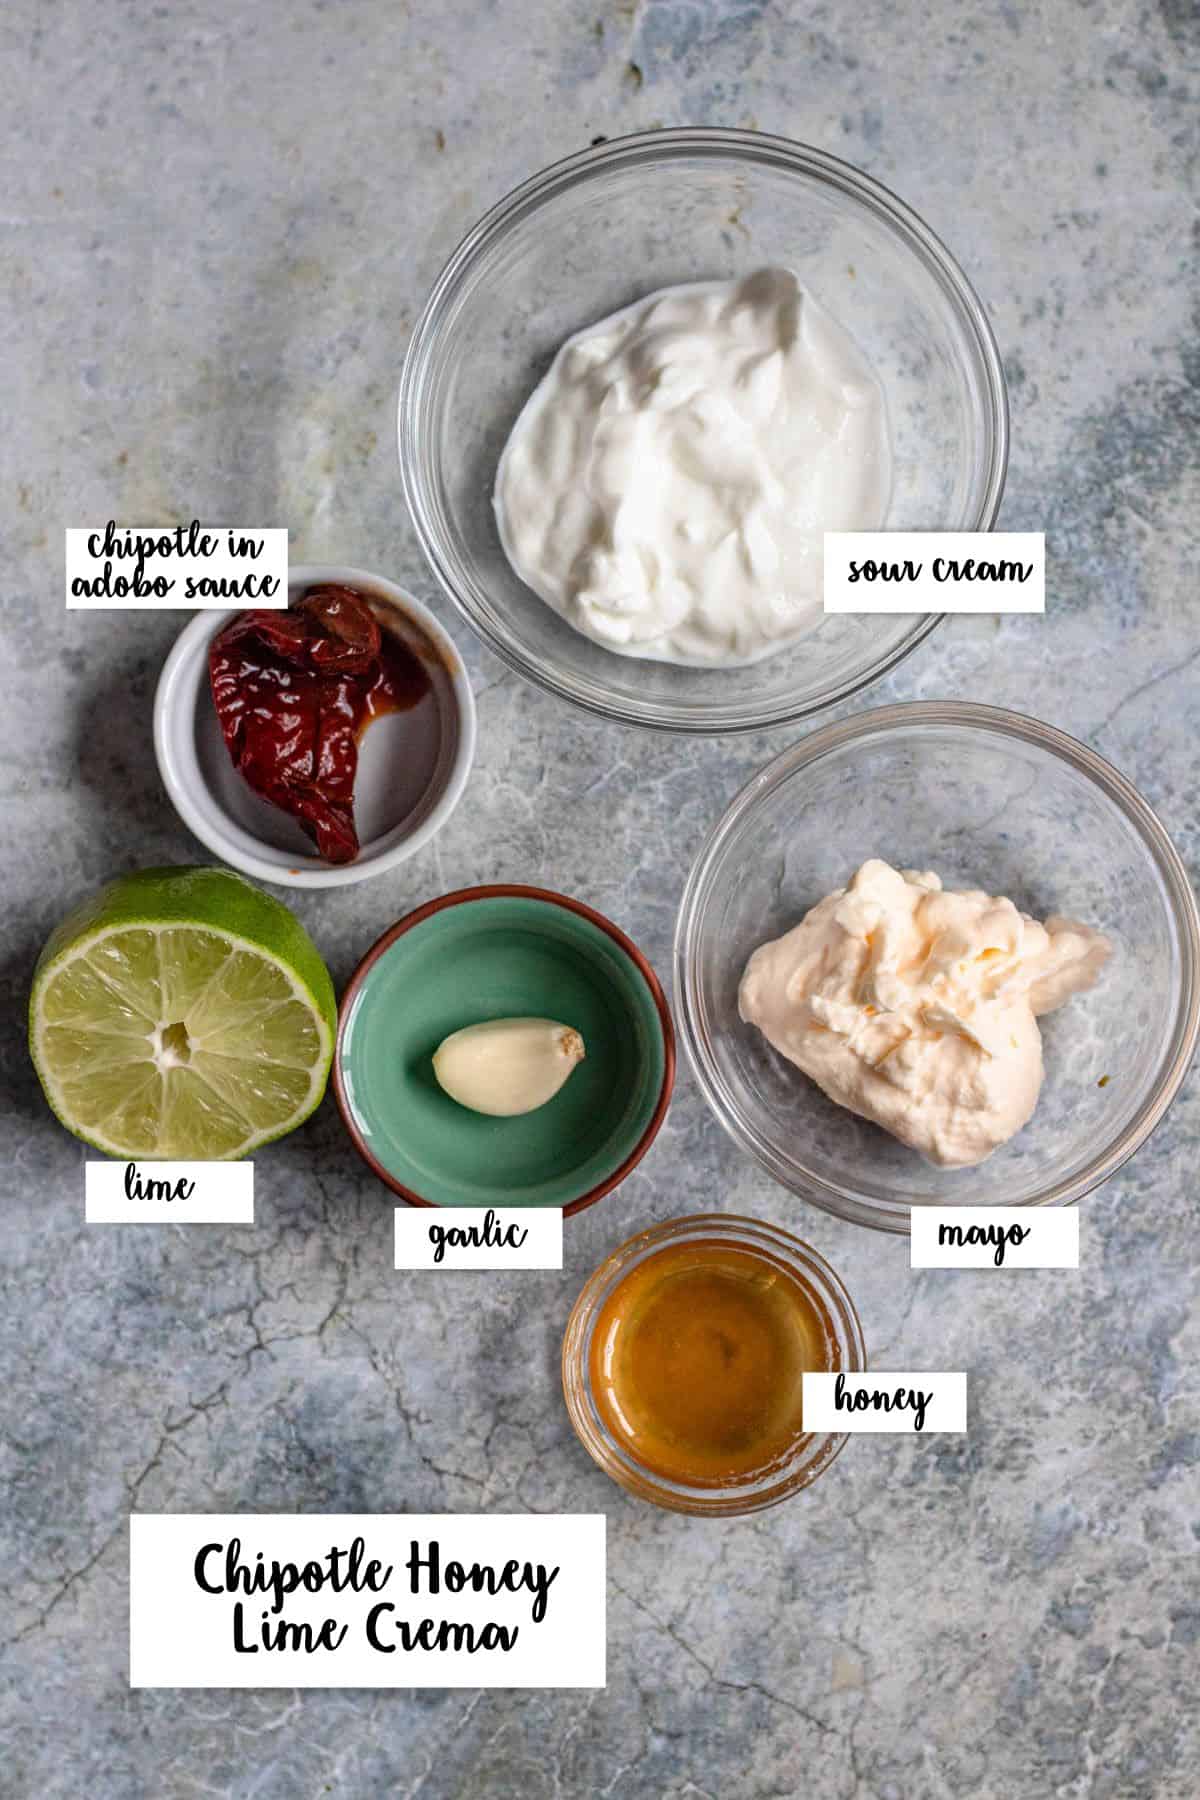 Ingredients shown are used to prepare Chipotle Honey Lime Crema. 